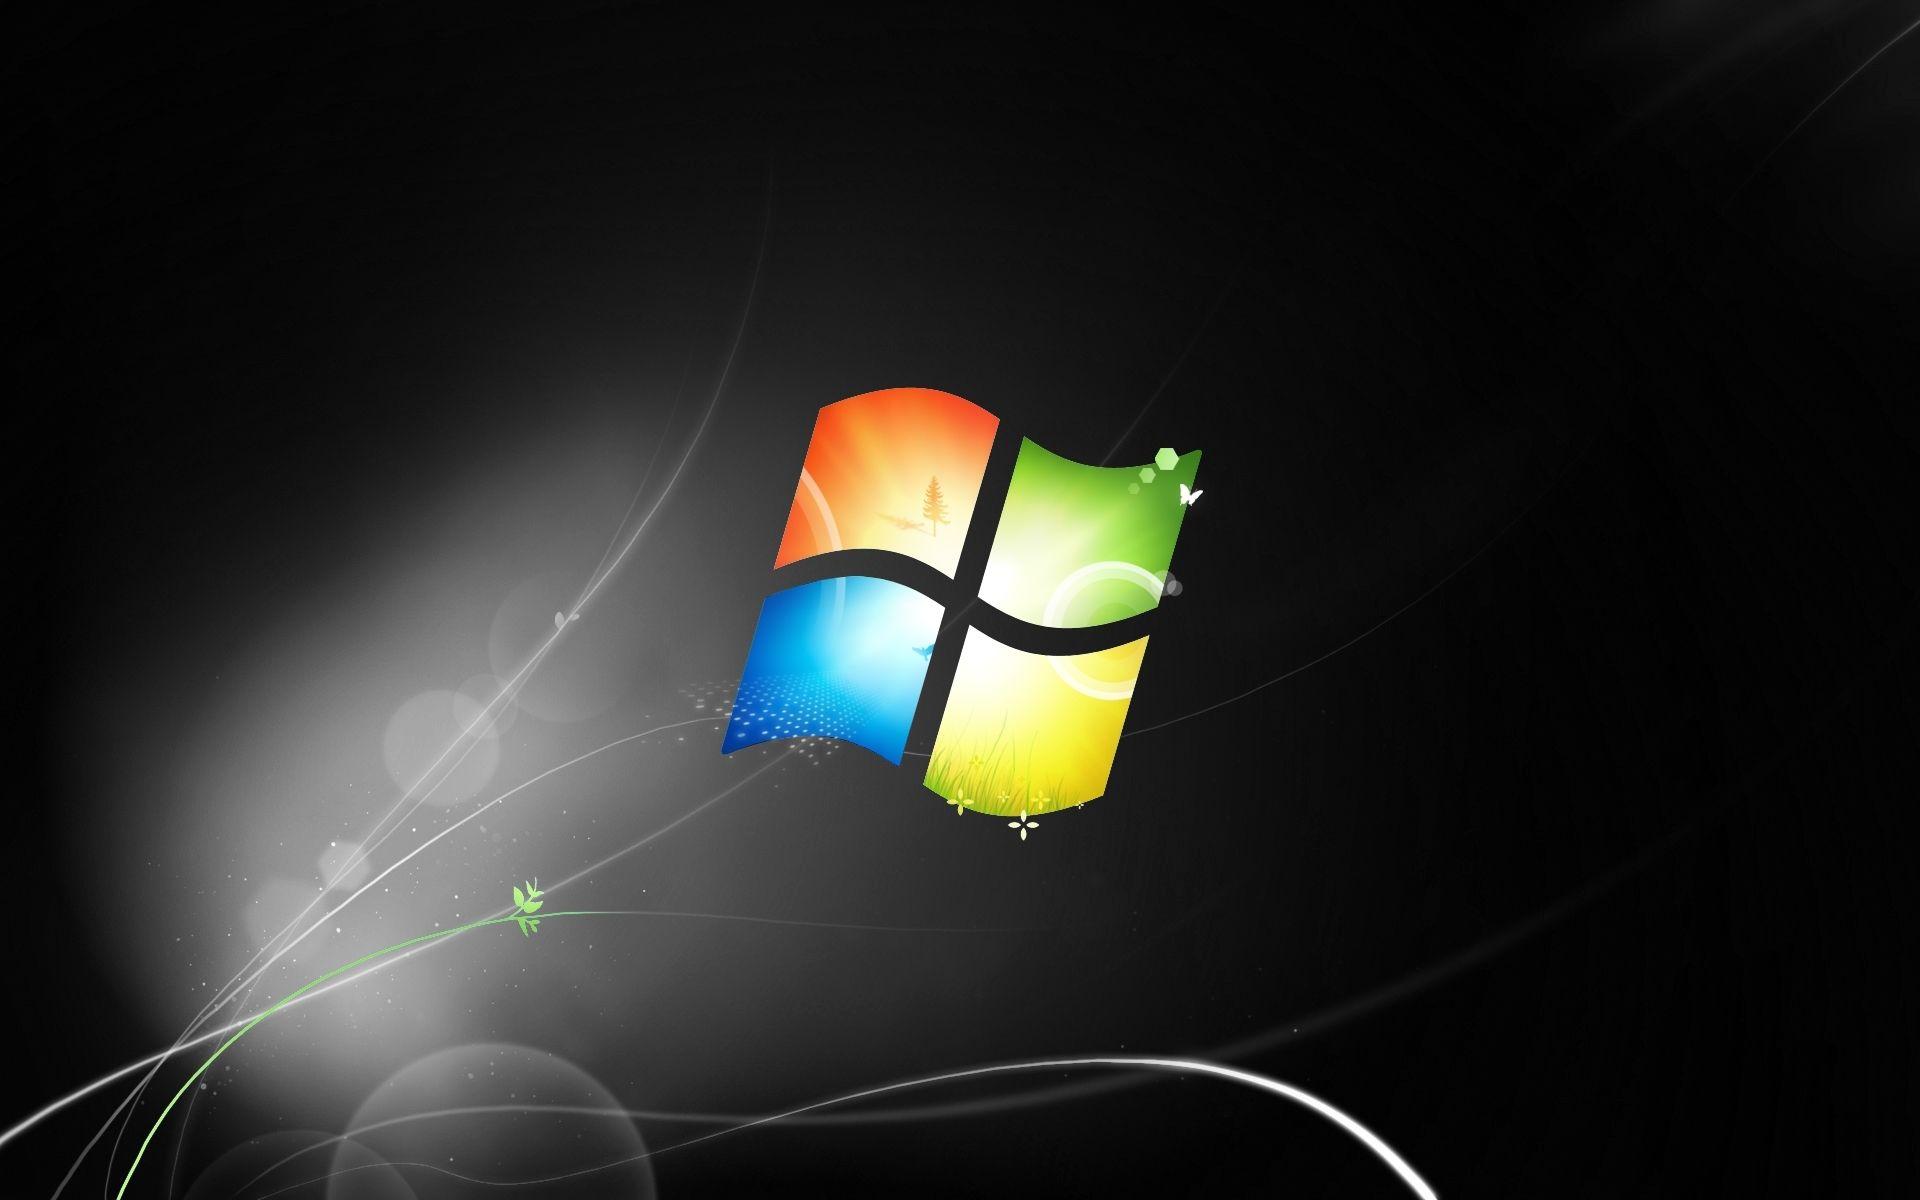 Windows 7 Ultimate Wallpaper. High Definition image